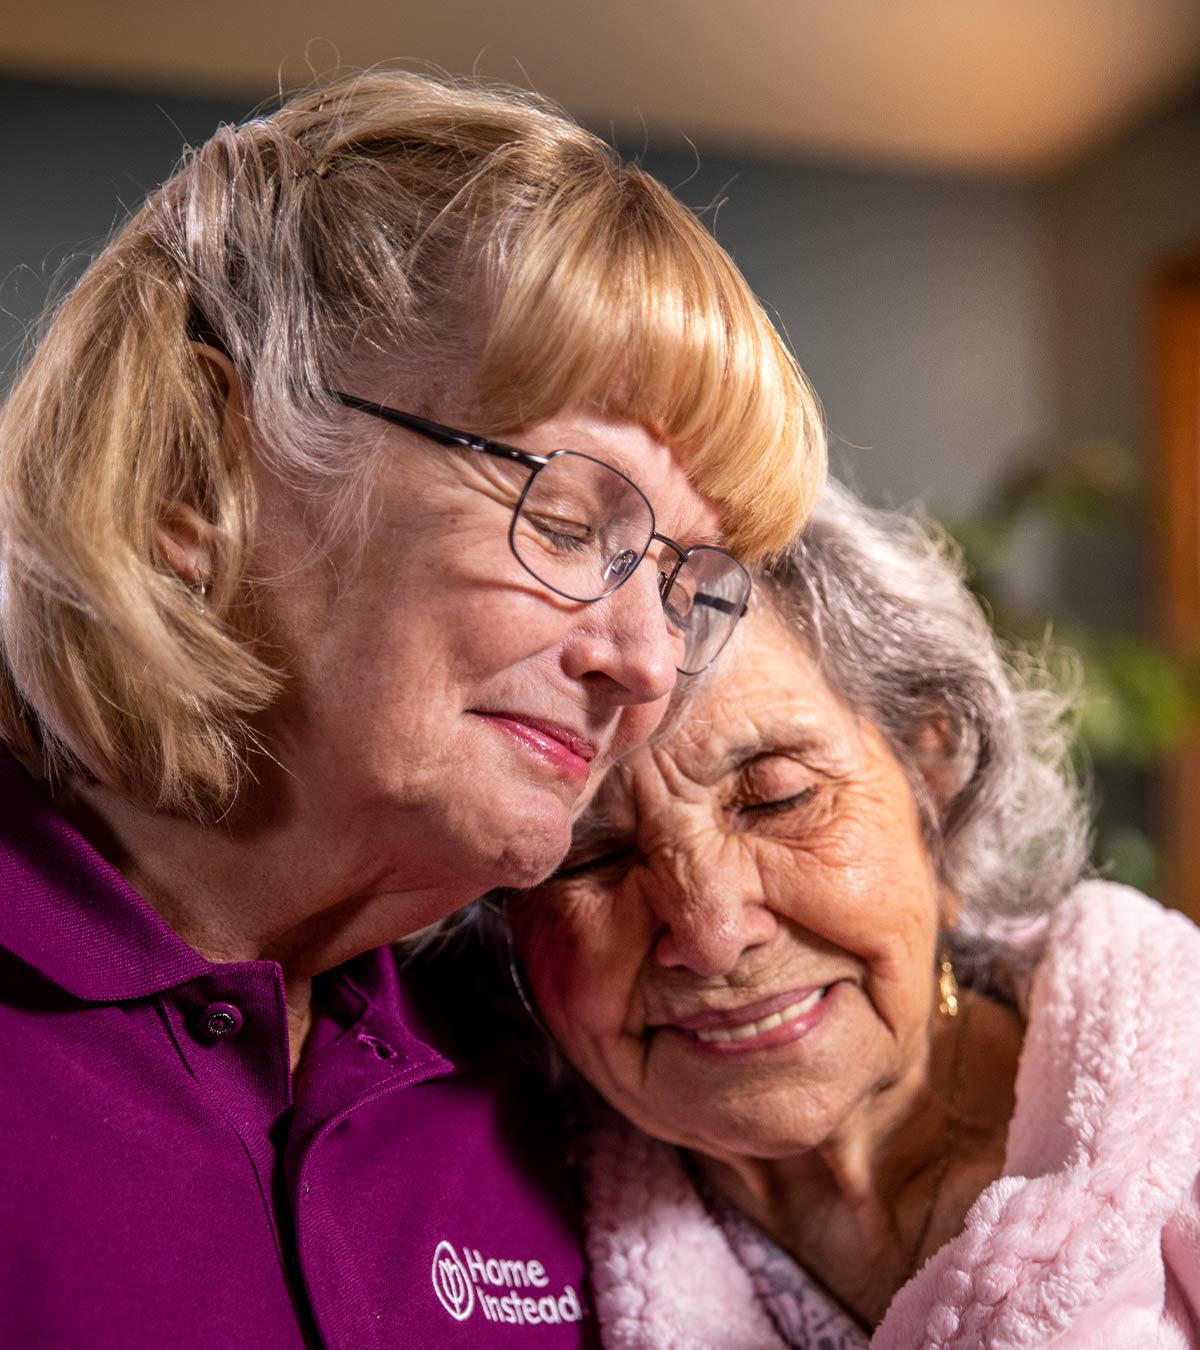 CAREGiver providing in-home senior care services. Home Instead of Hillsboro, OR provides Elder Care to aging adults. 